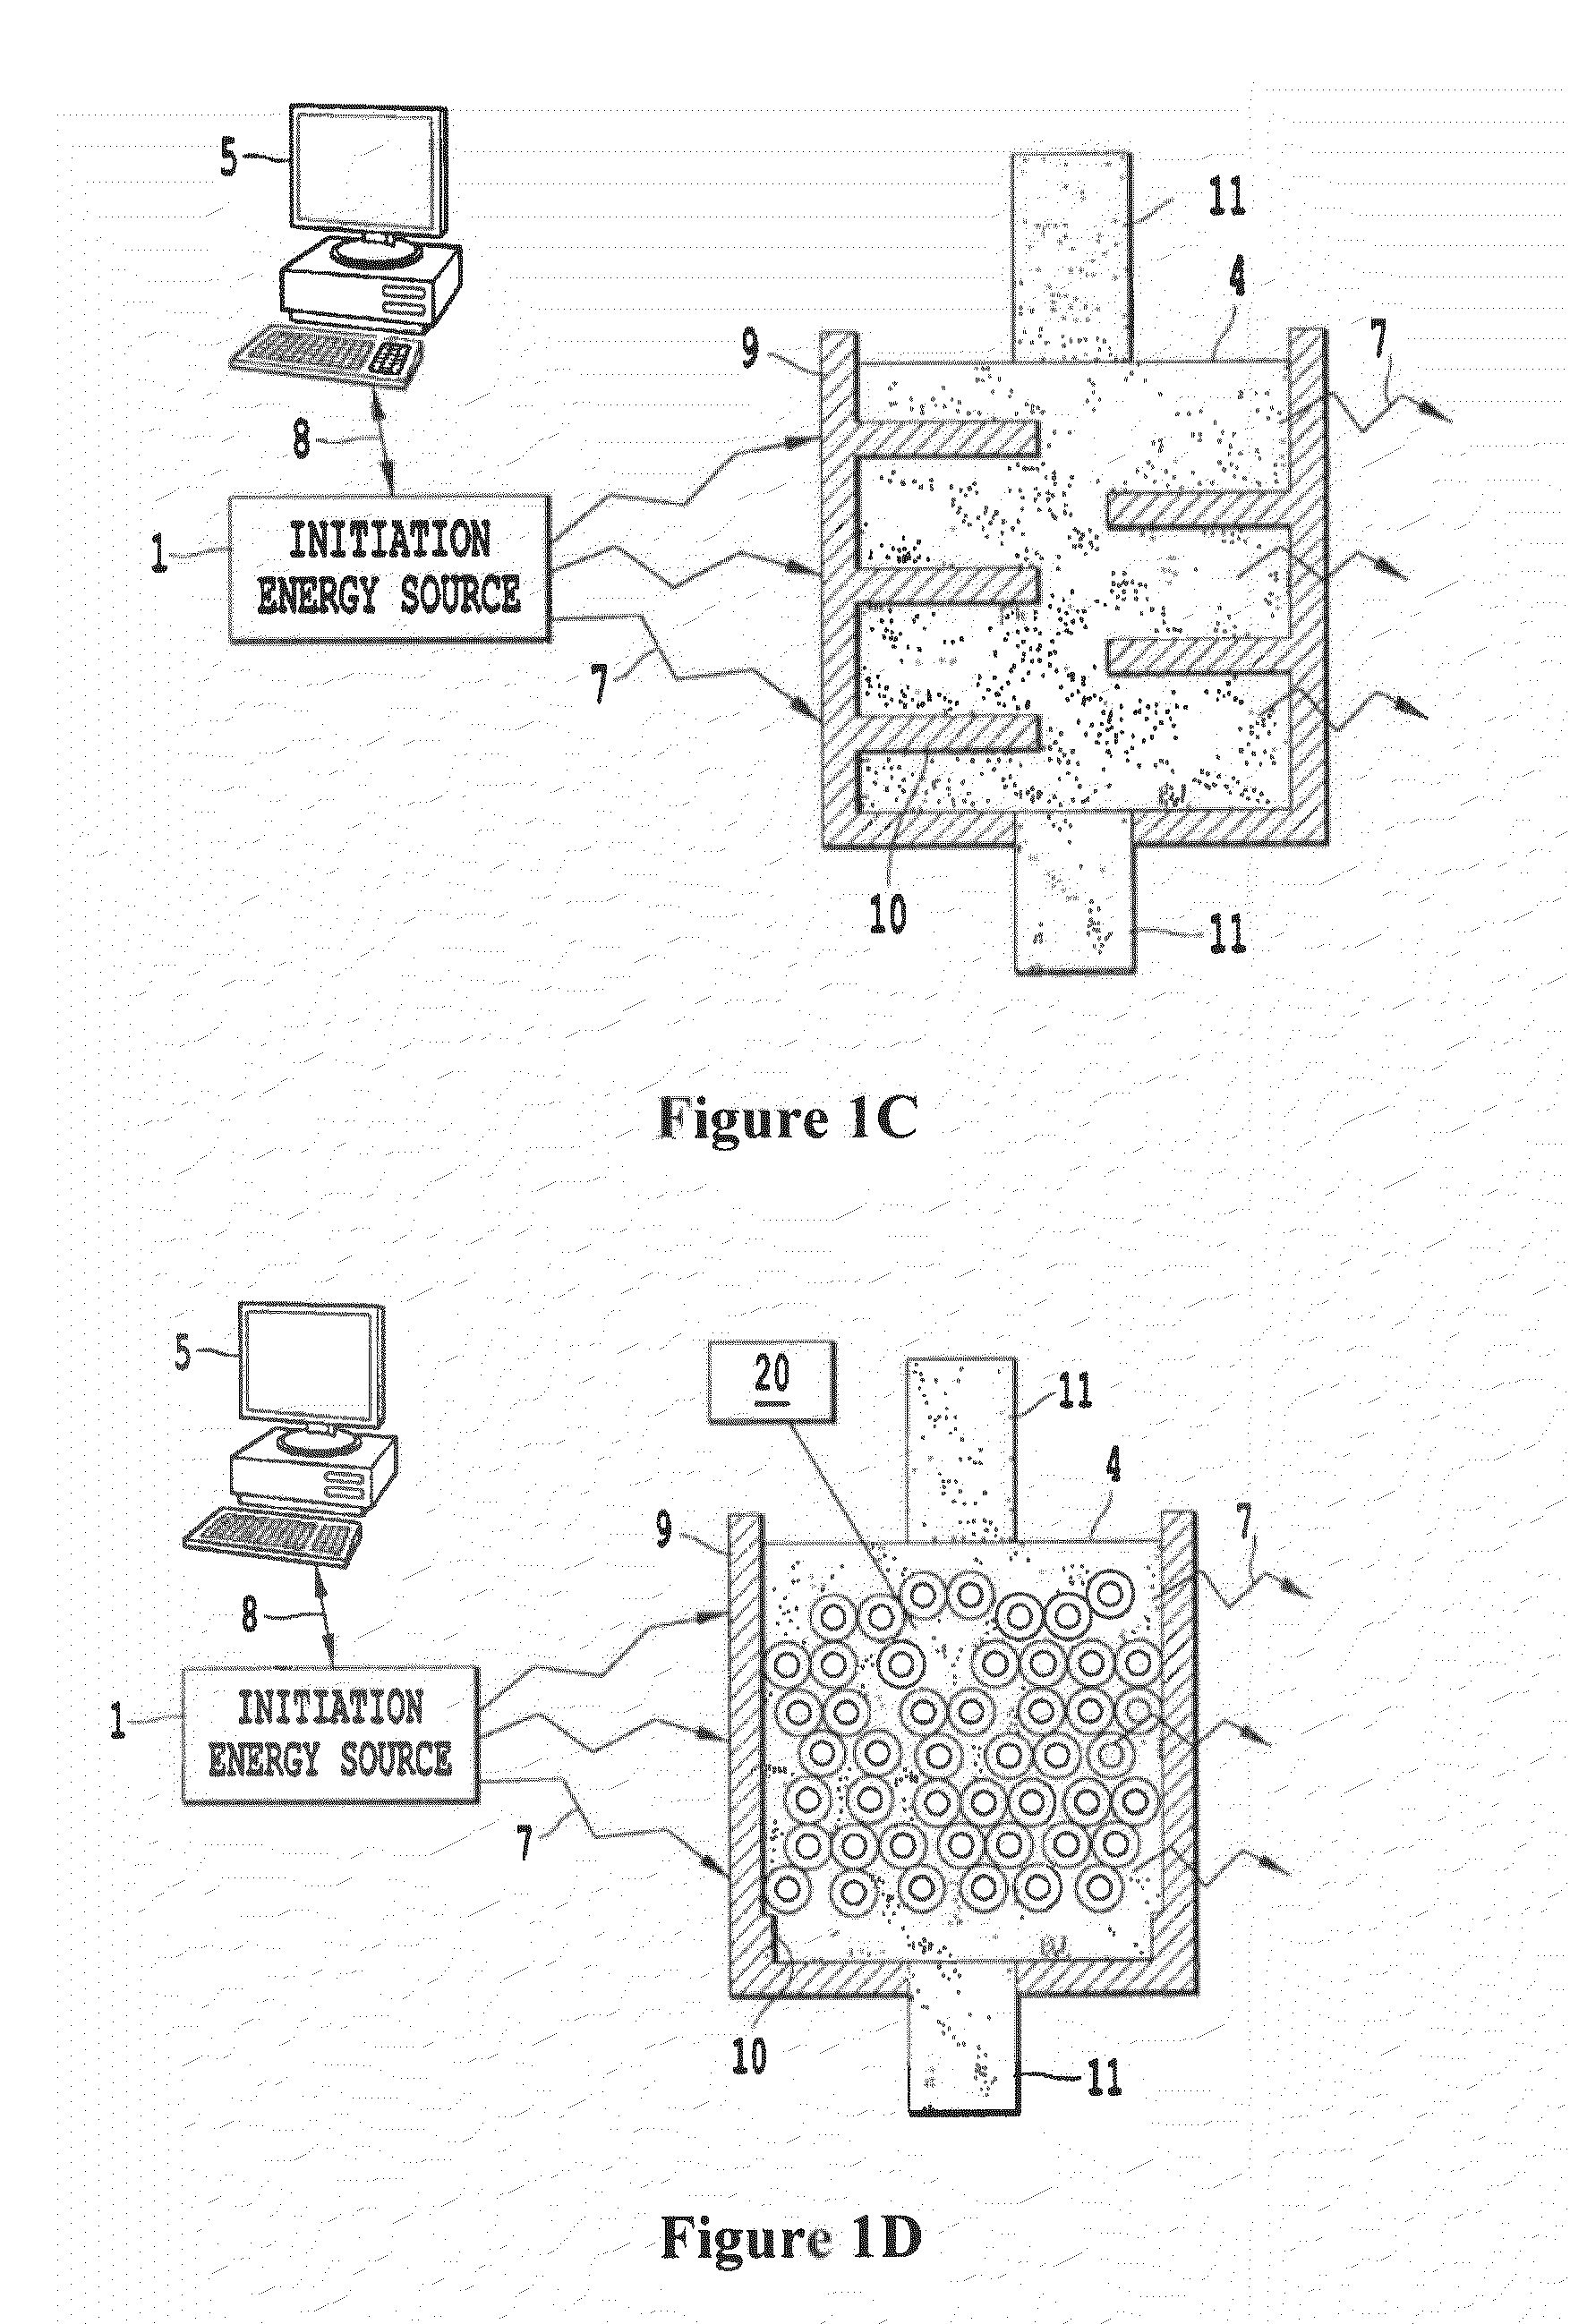 Up and down conversion systems for production of emitted light from various energy sources including radio frequency, microwave energy and magnetic induction sources for upconversion